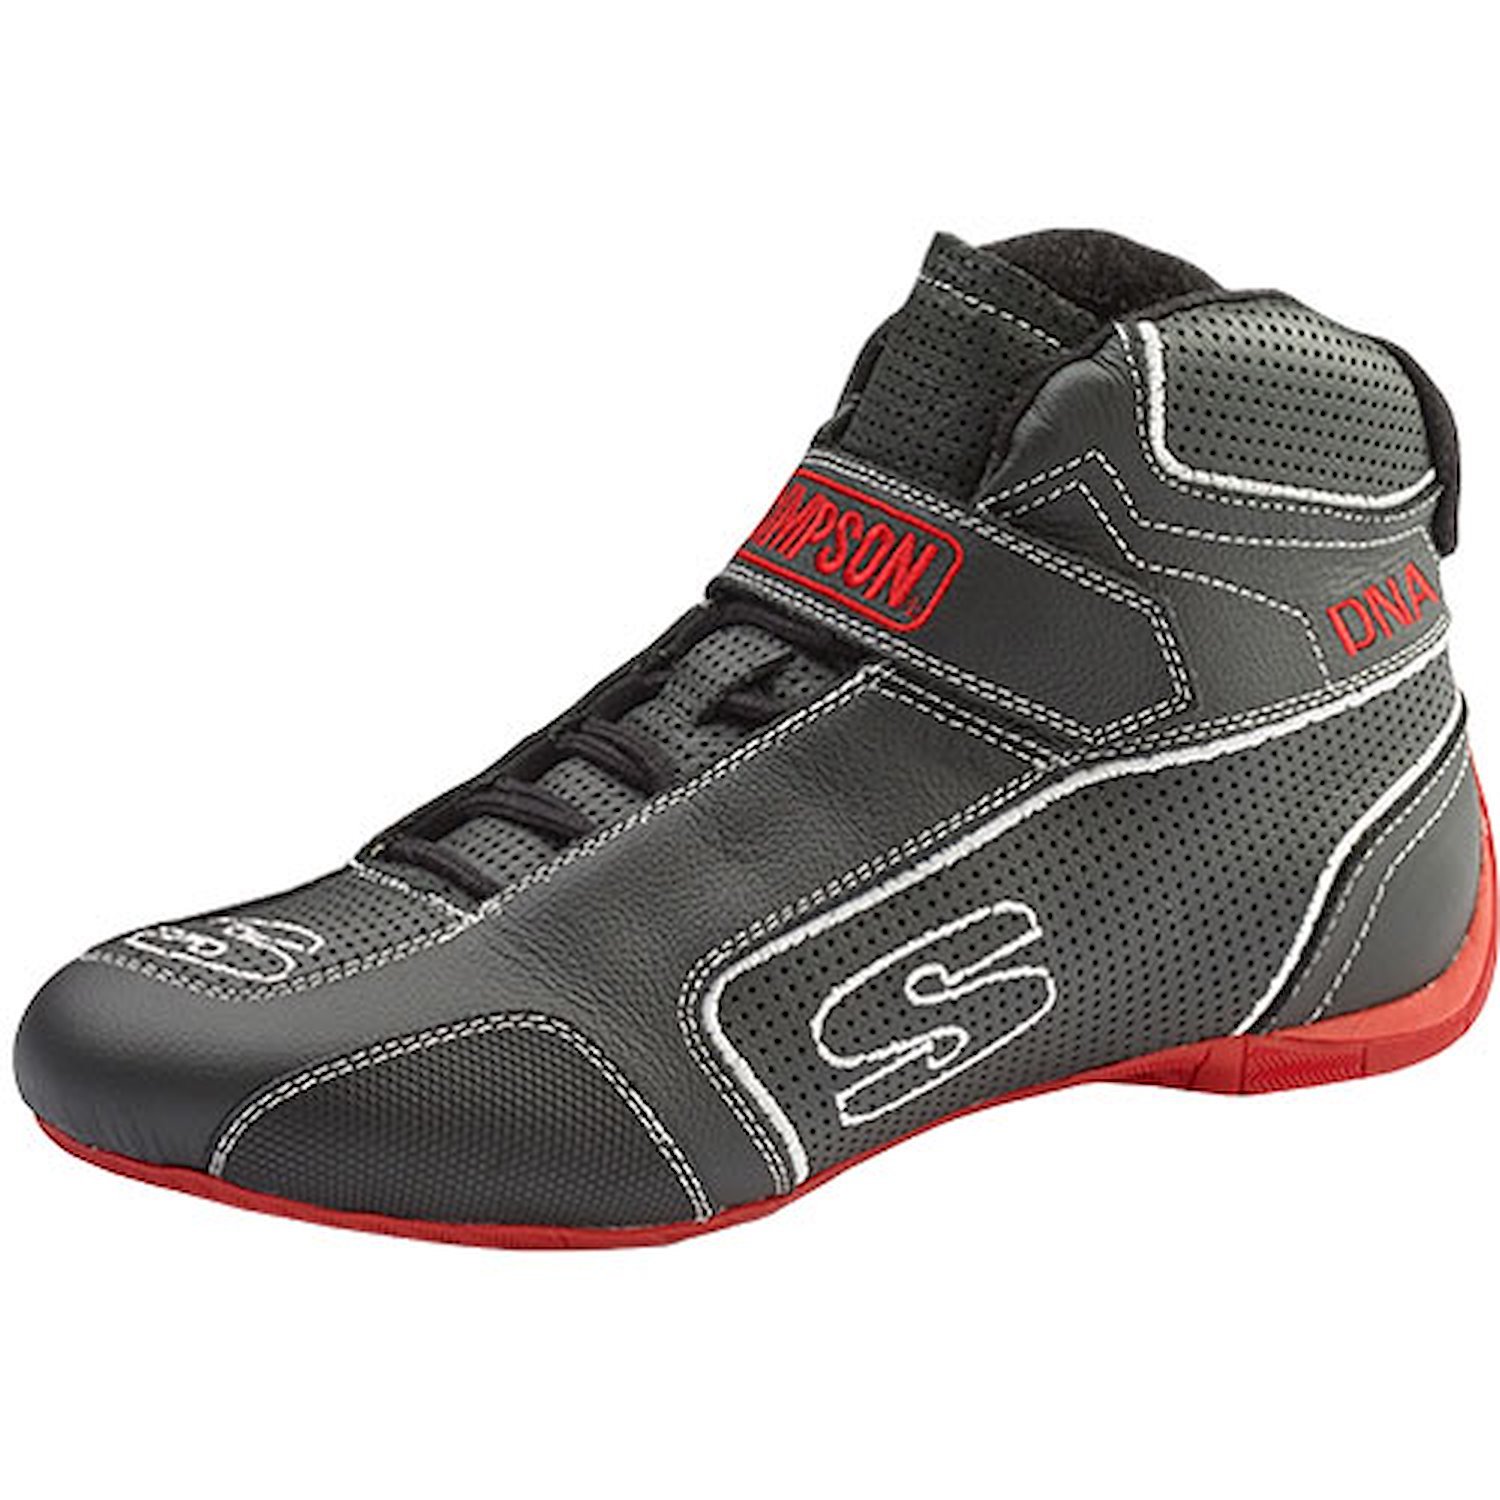 SFI 3.3/5 DNA Racing Shoes Size: 11.5